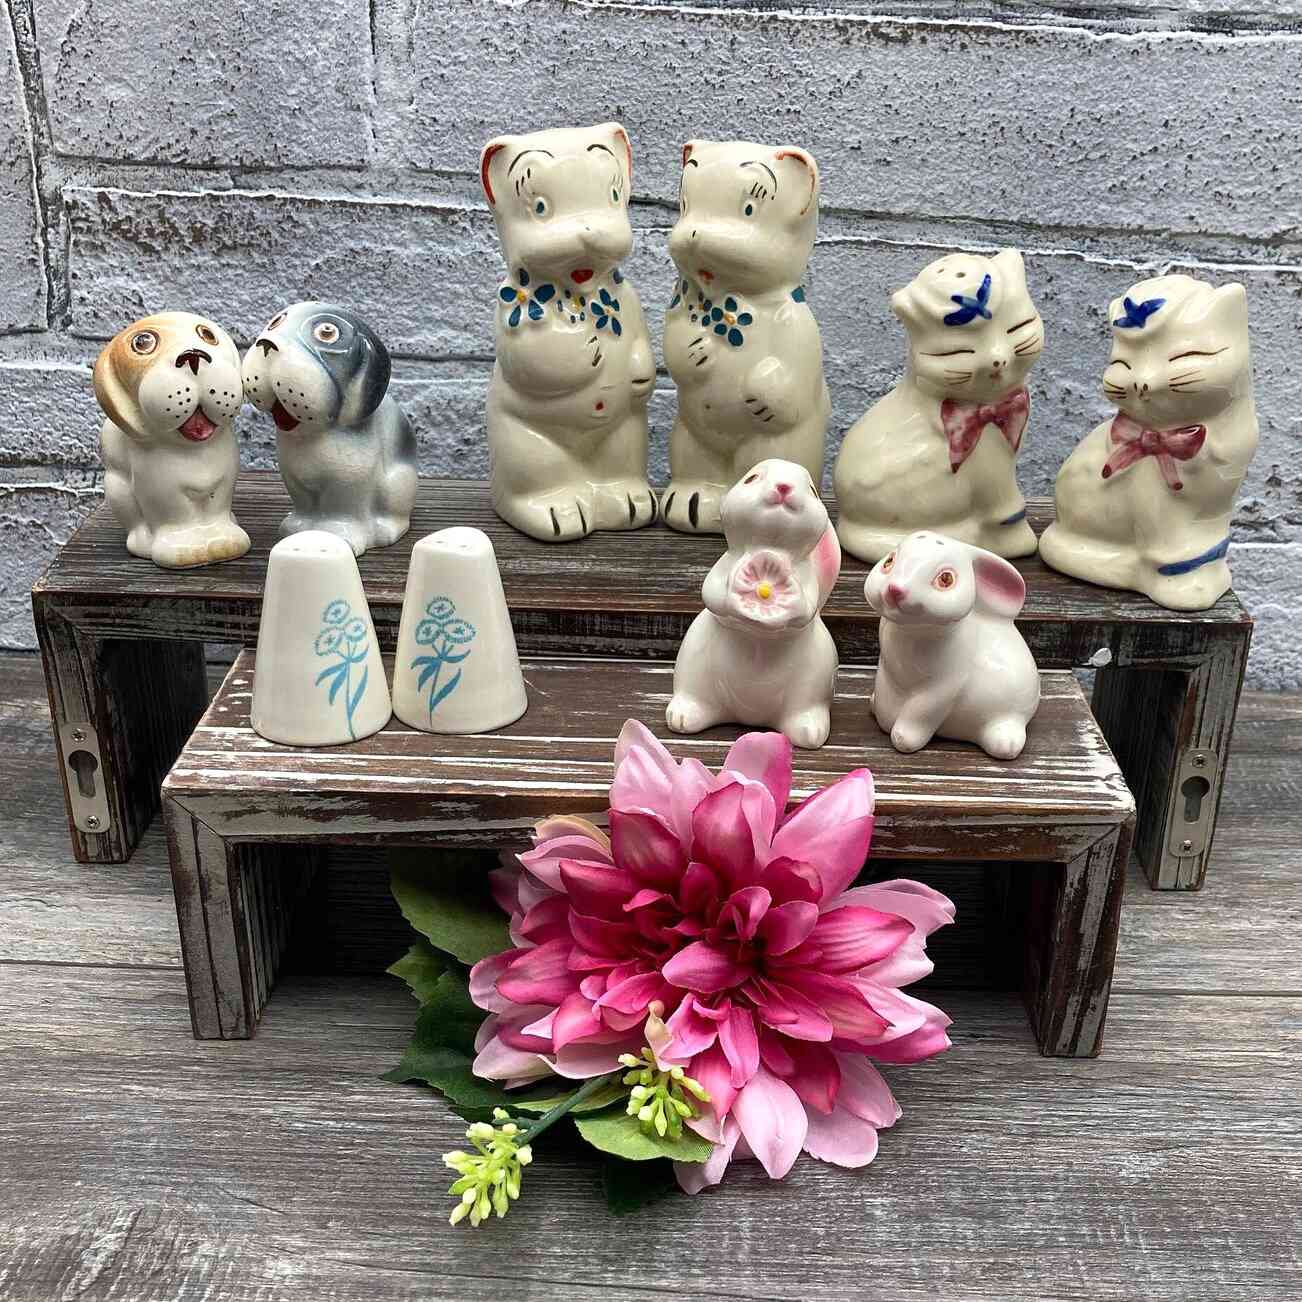 five sets of salt and pepper shakers shaped like dogs, cats, rabbits